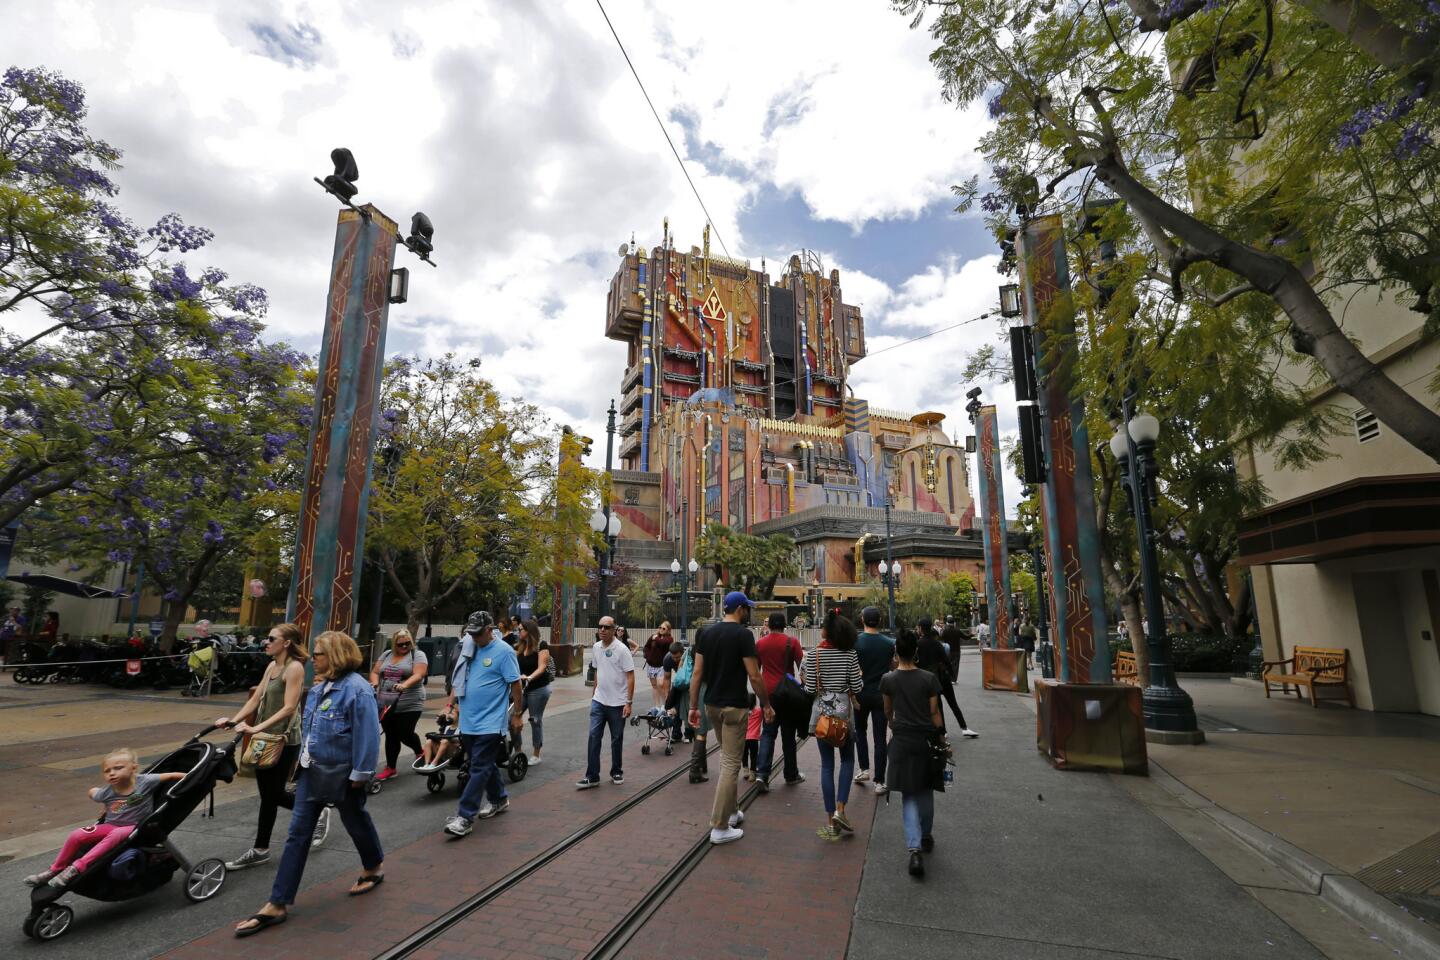 Exterior view of the Guardians of the Galaxy: Mission Breakout ride in Anaheim's California Adventure theme park.